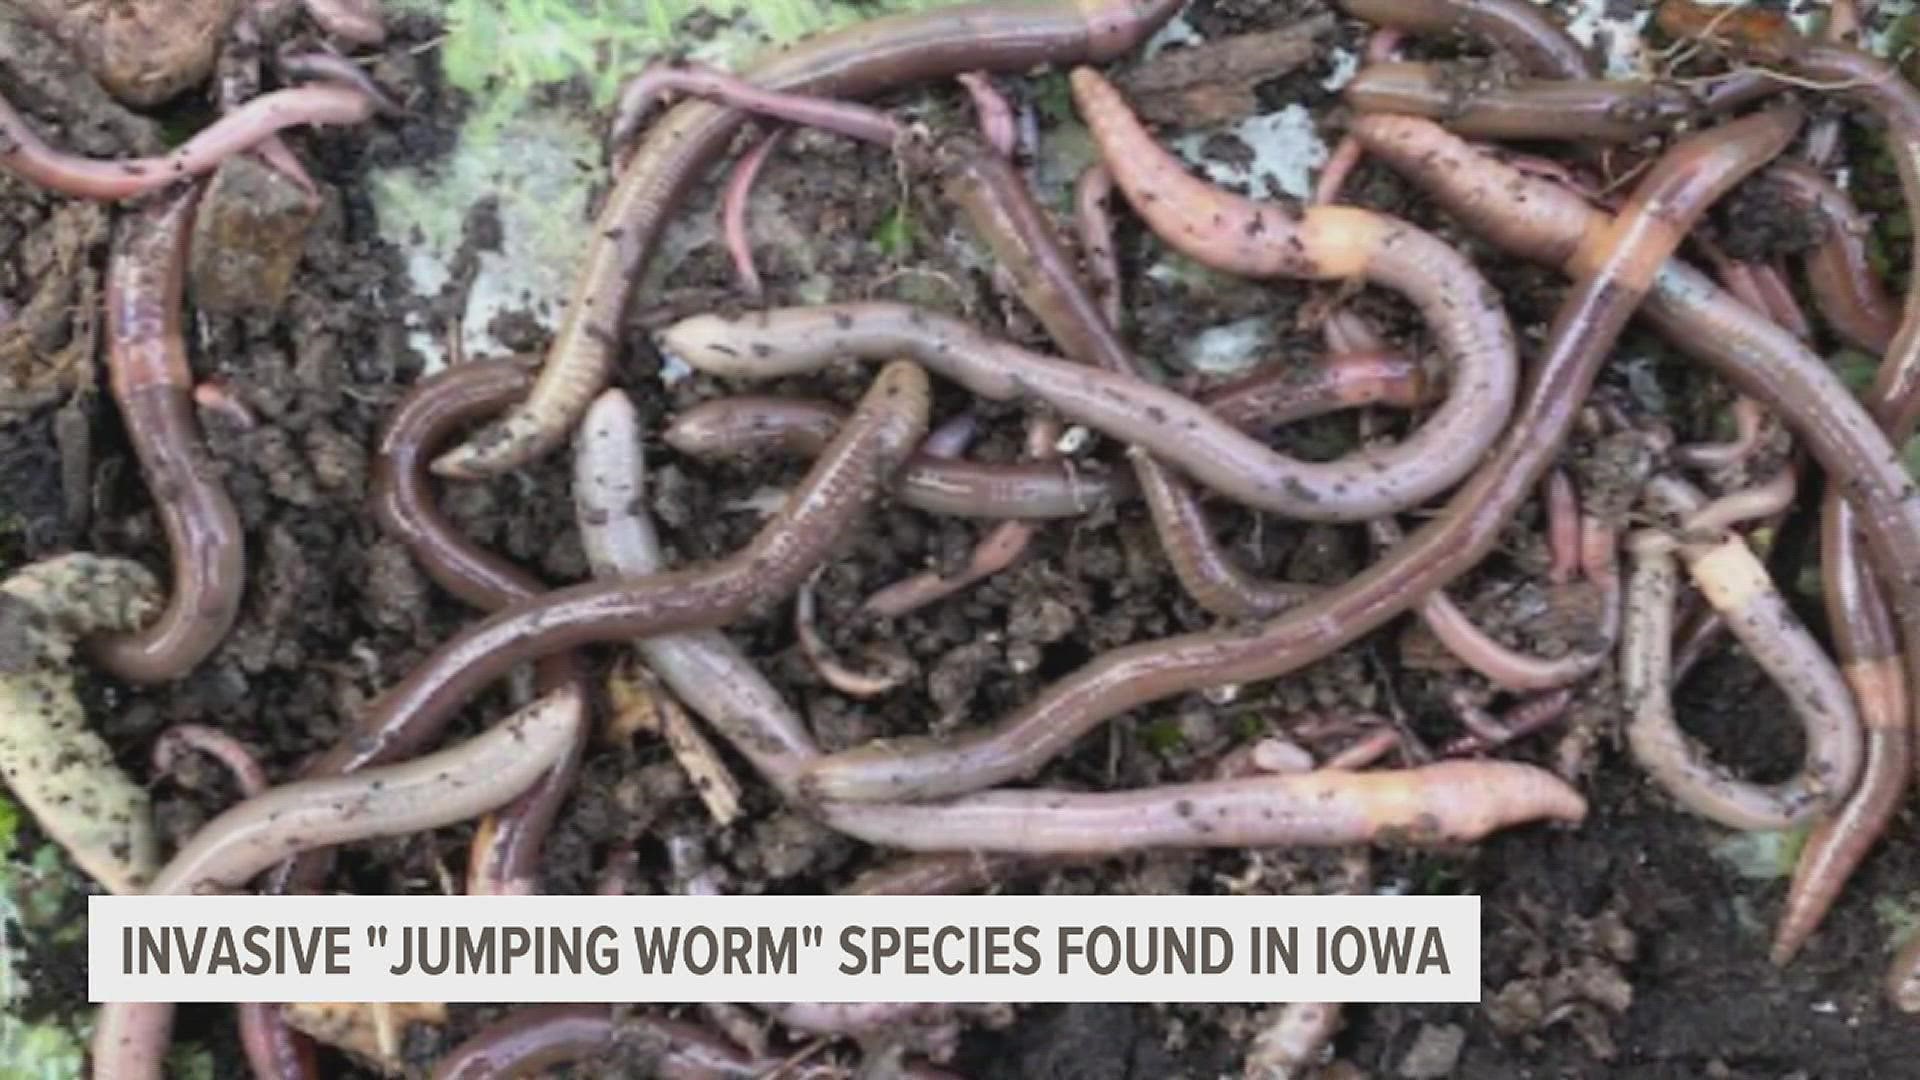 The jumping worm has been identified in 11 counties across the state.